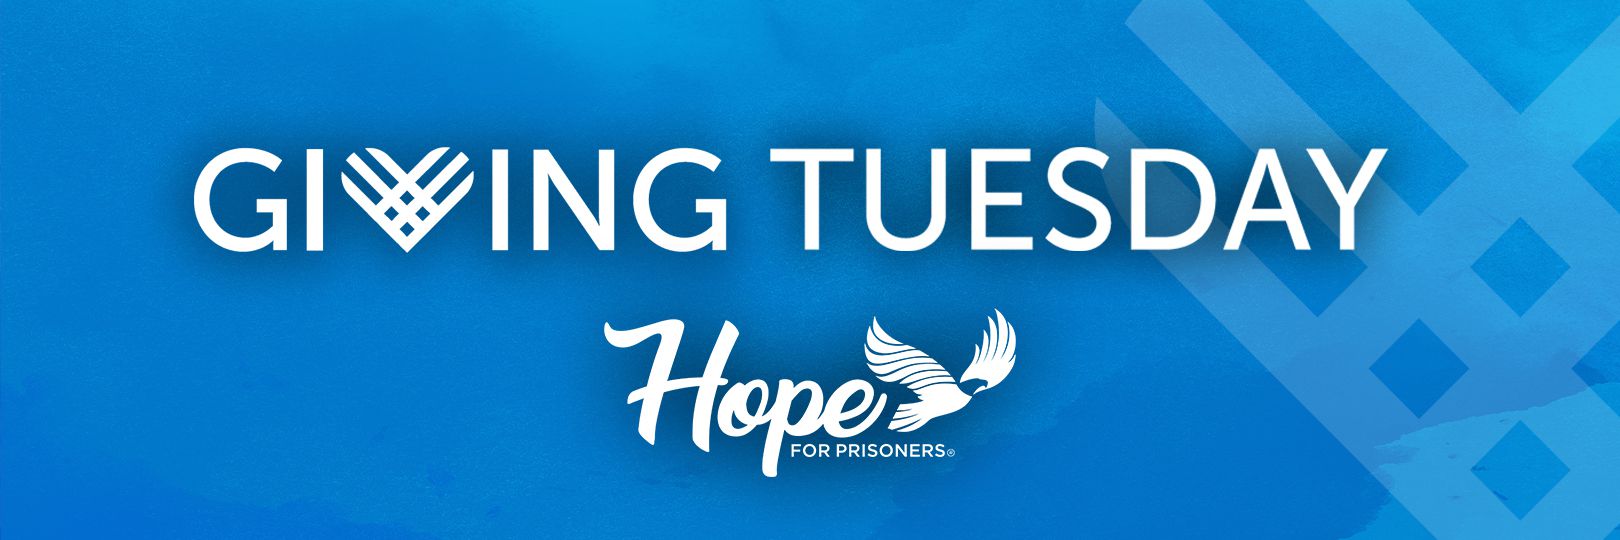 Giving Tuesday - Hope